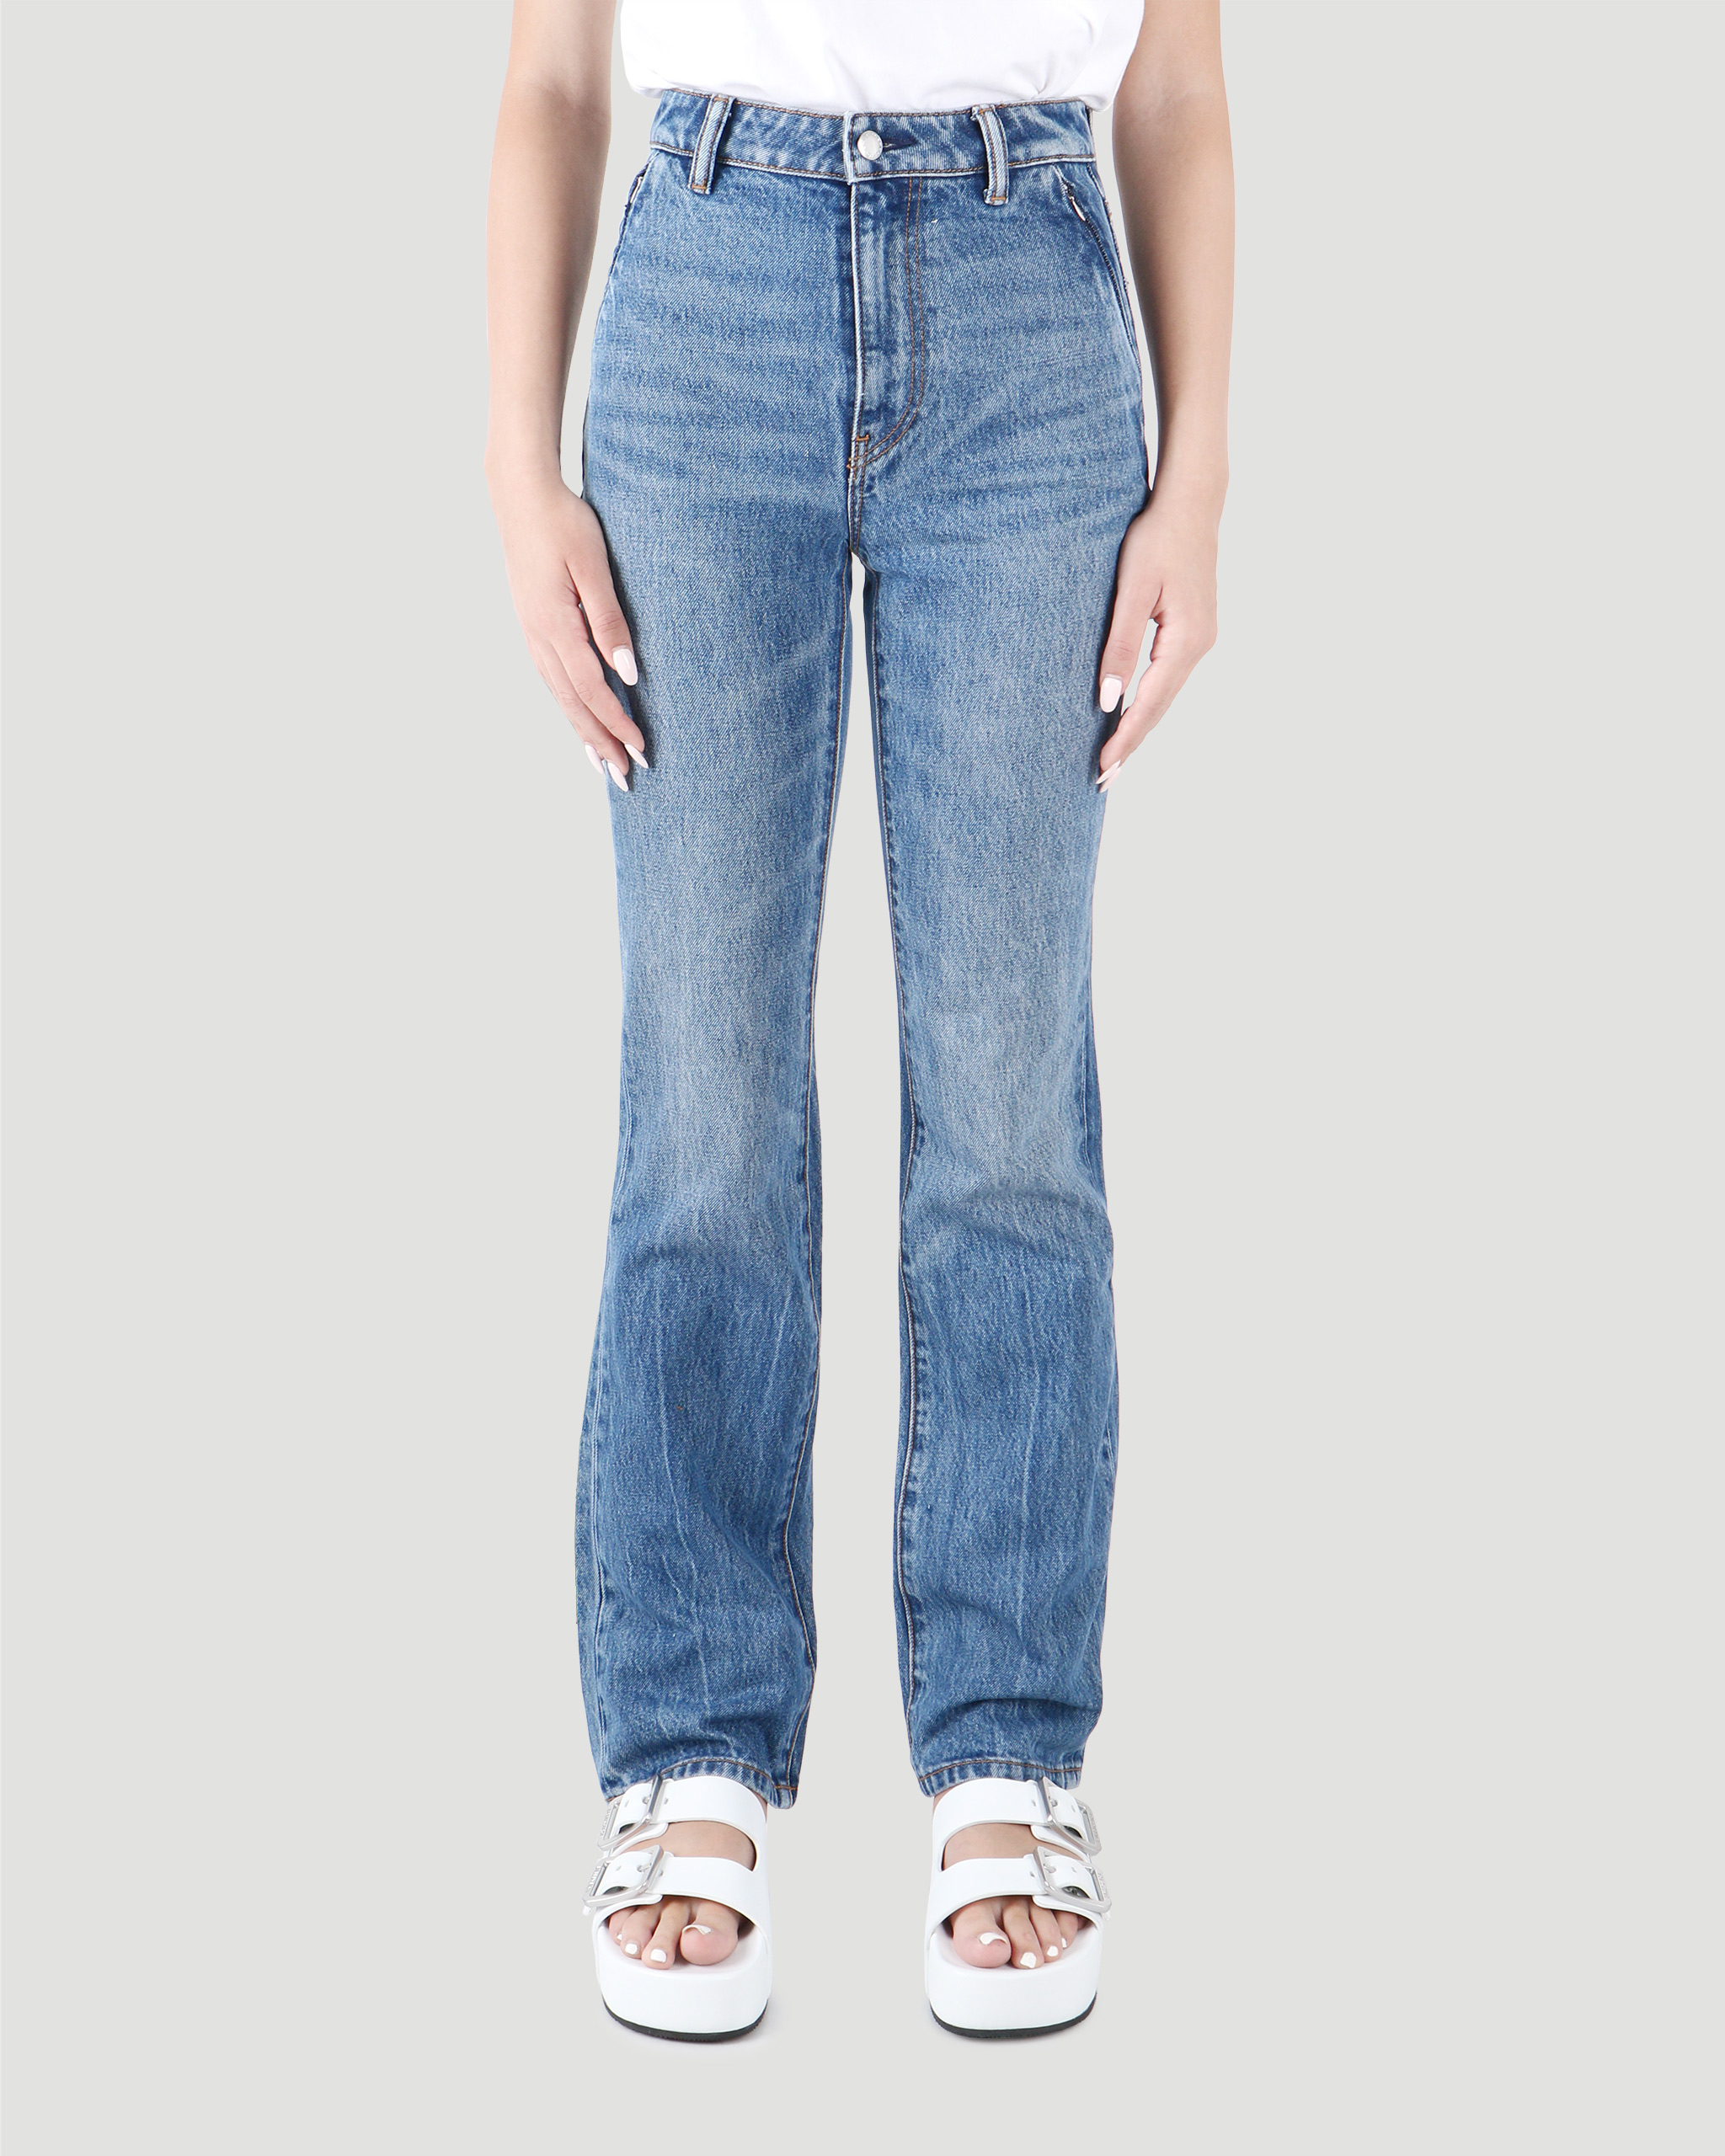 Fly high-rise stacked jean in denim - All-U-Re